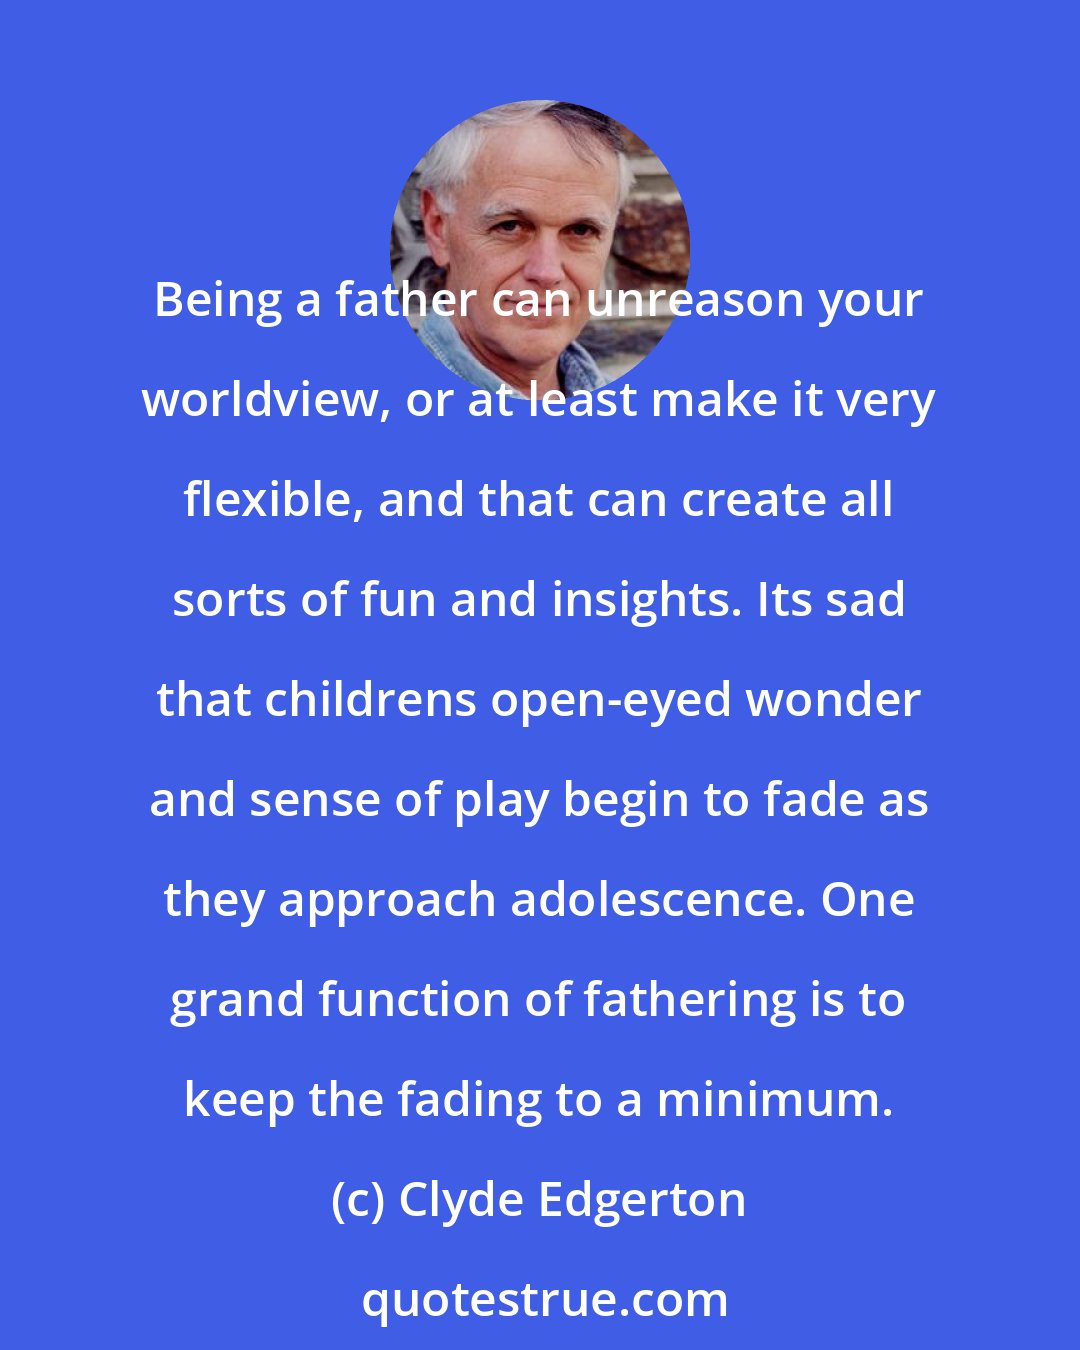 Clyde Edgerton: Being a father can unreason your worldview, or at least make it very flexible, and that can create all sorts of fun and insights. Its sad that childrens open-eyed wonder and sense of play begin to fade as they approach adolescence. One grand function of fathering is to keep the fading to a minimum.